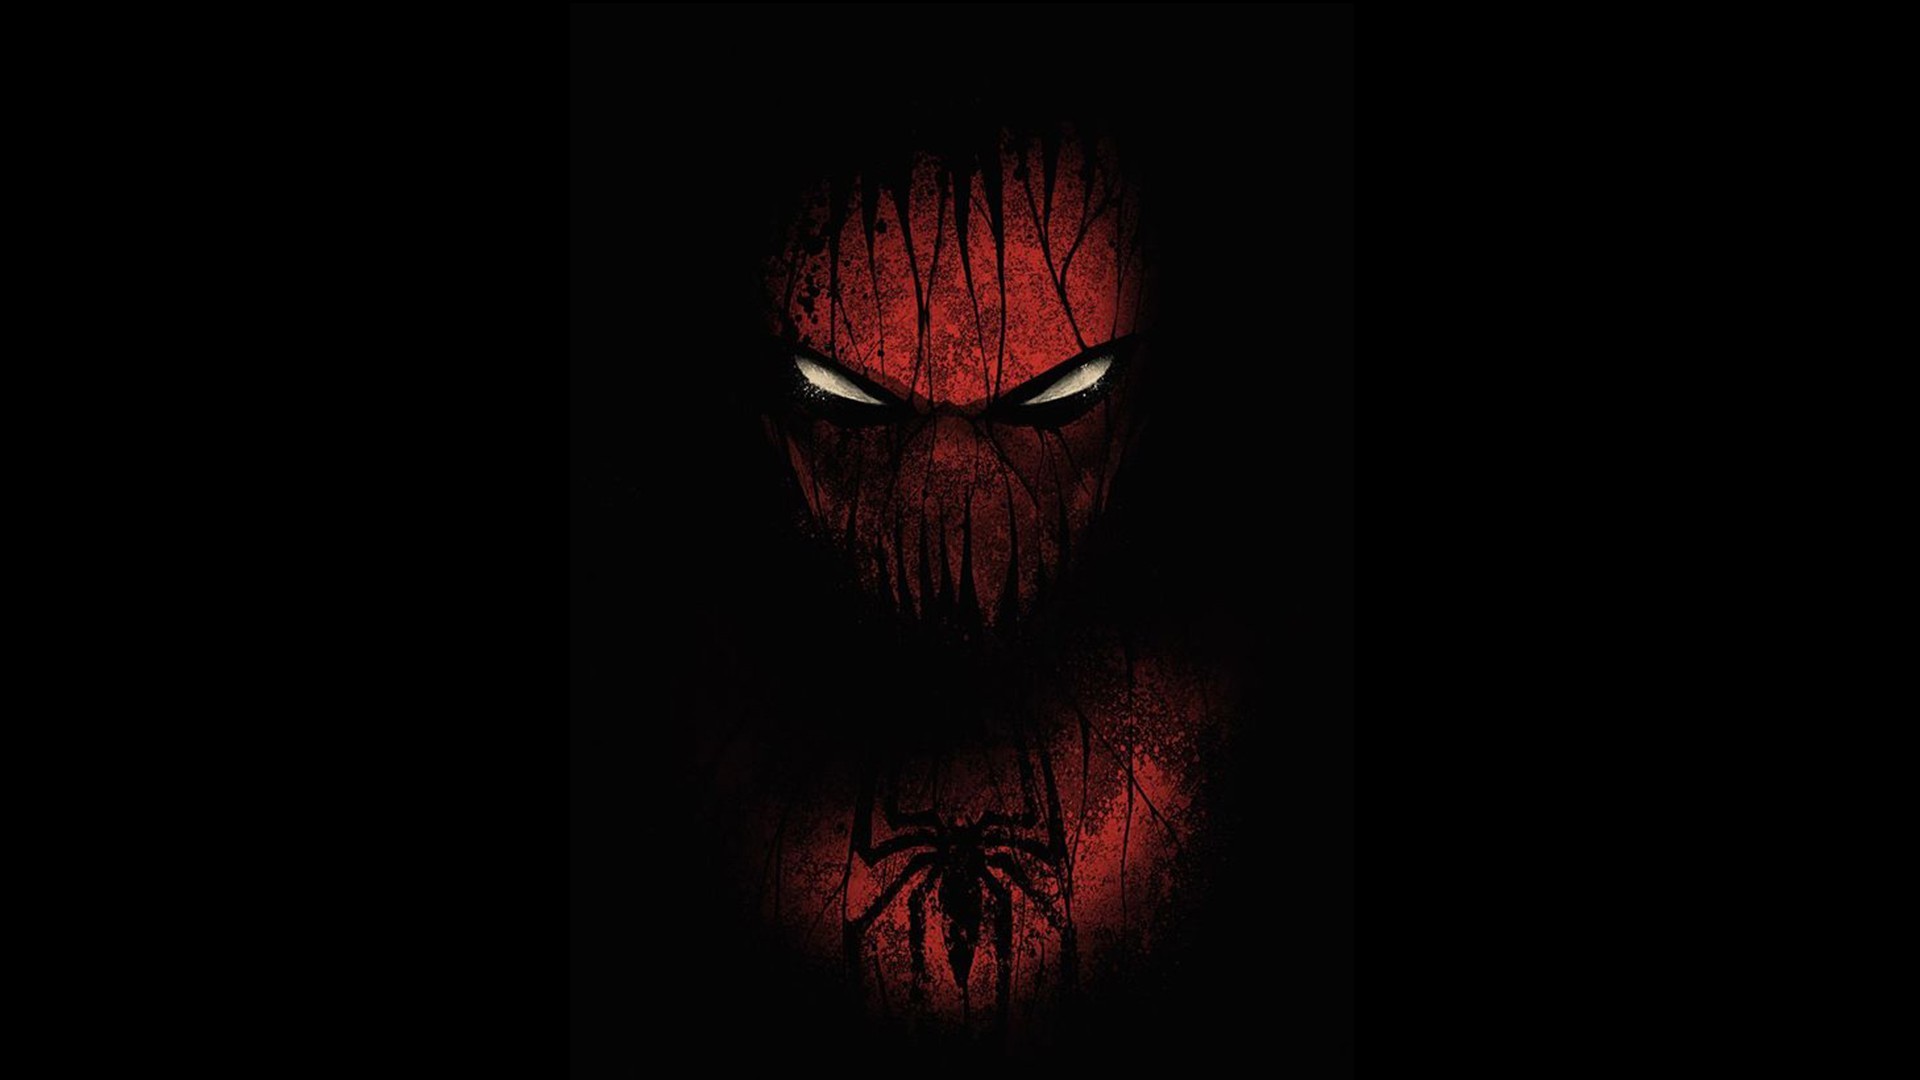 1920x1080 Download Original Size. ,. SpiderMan HD Wallpapers Backgrounds ...